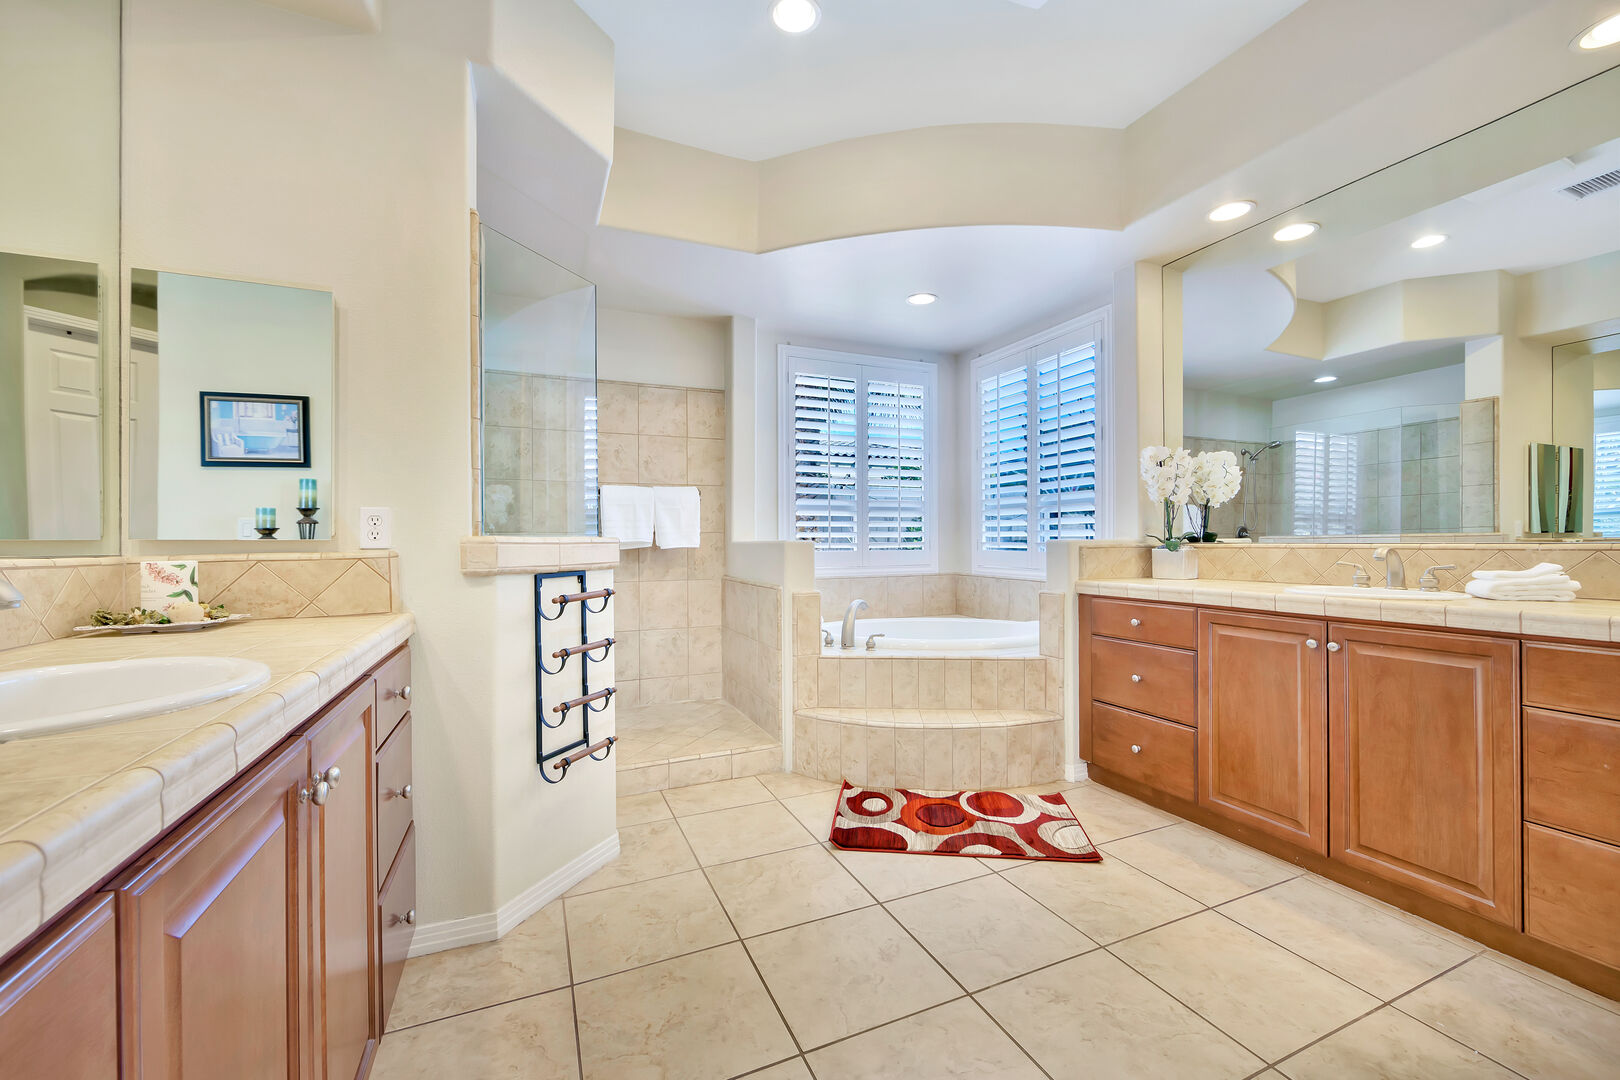 Master Suite 1 private, en suite bathroom features a soaking tub, tile shower and two vanity sinks.